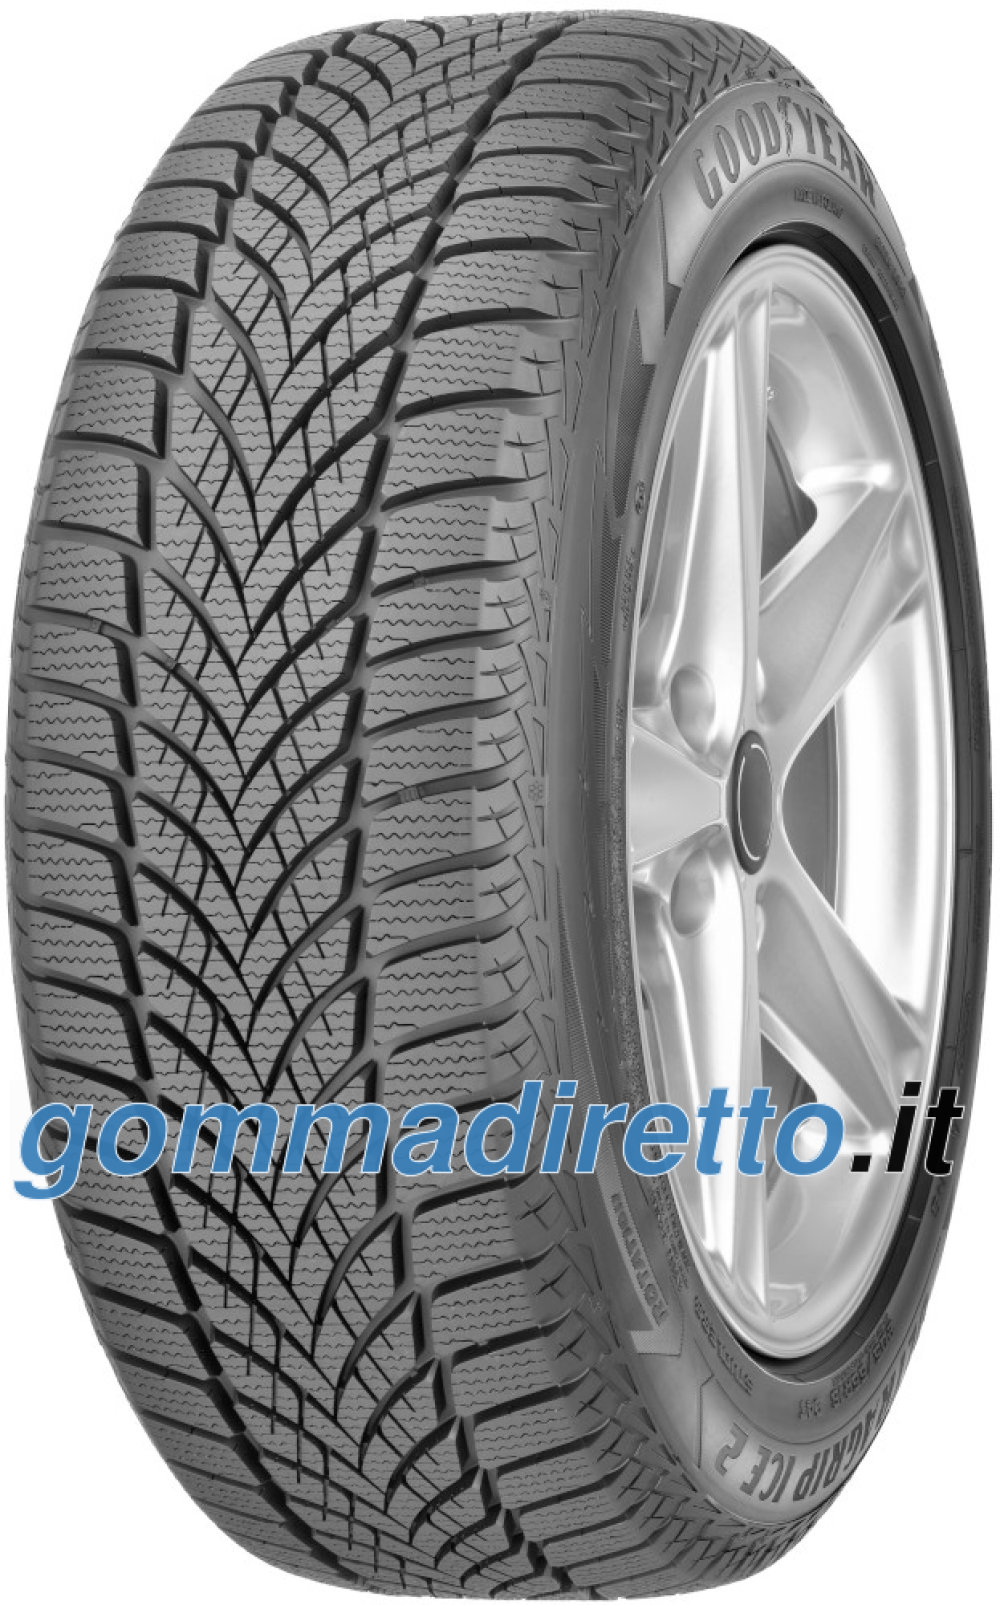 Image of Goodyear UltraGrip Ice 2 ( 215/55 R16 97T XL, Nordic compound, SCT )